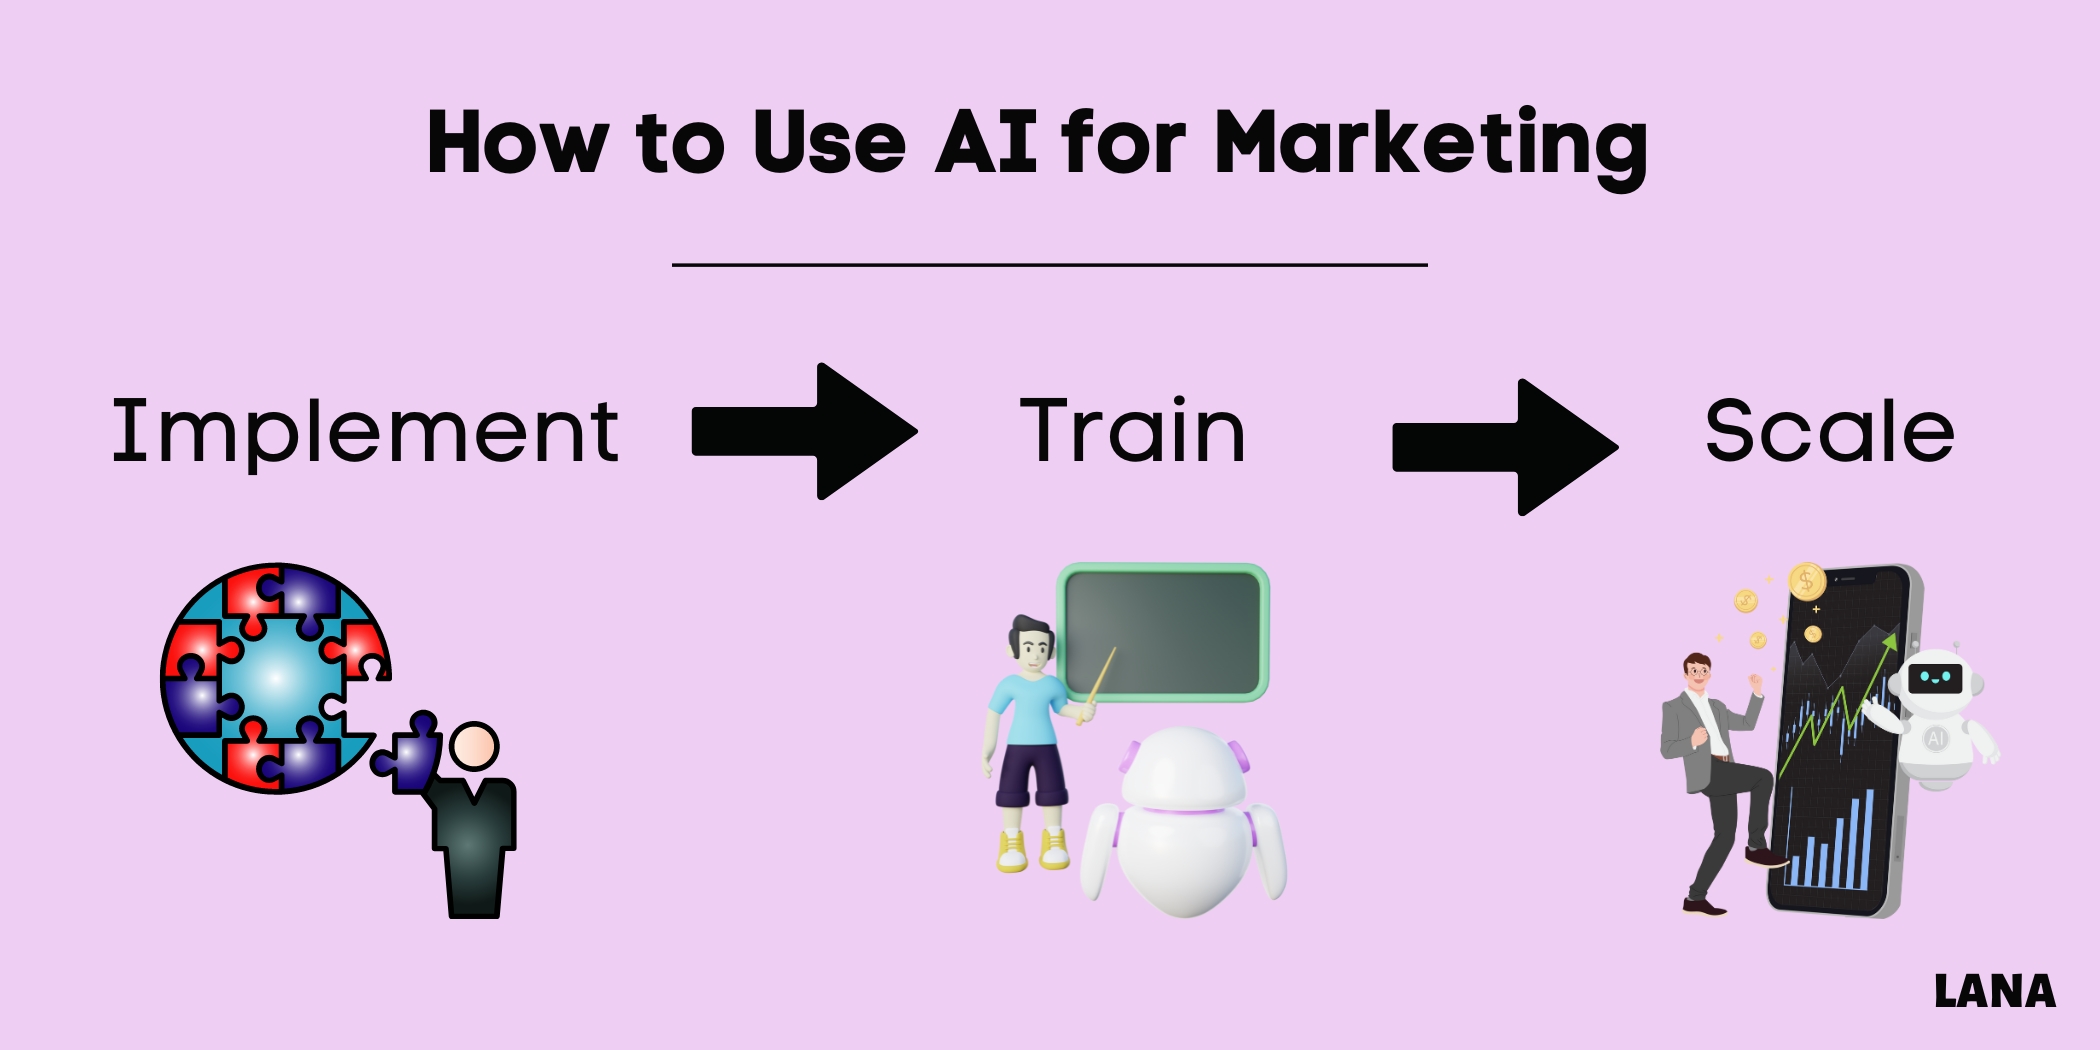 how to use ai for marketing which is implement, train, and scale 